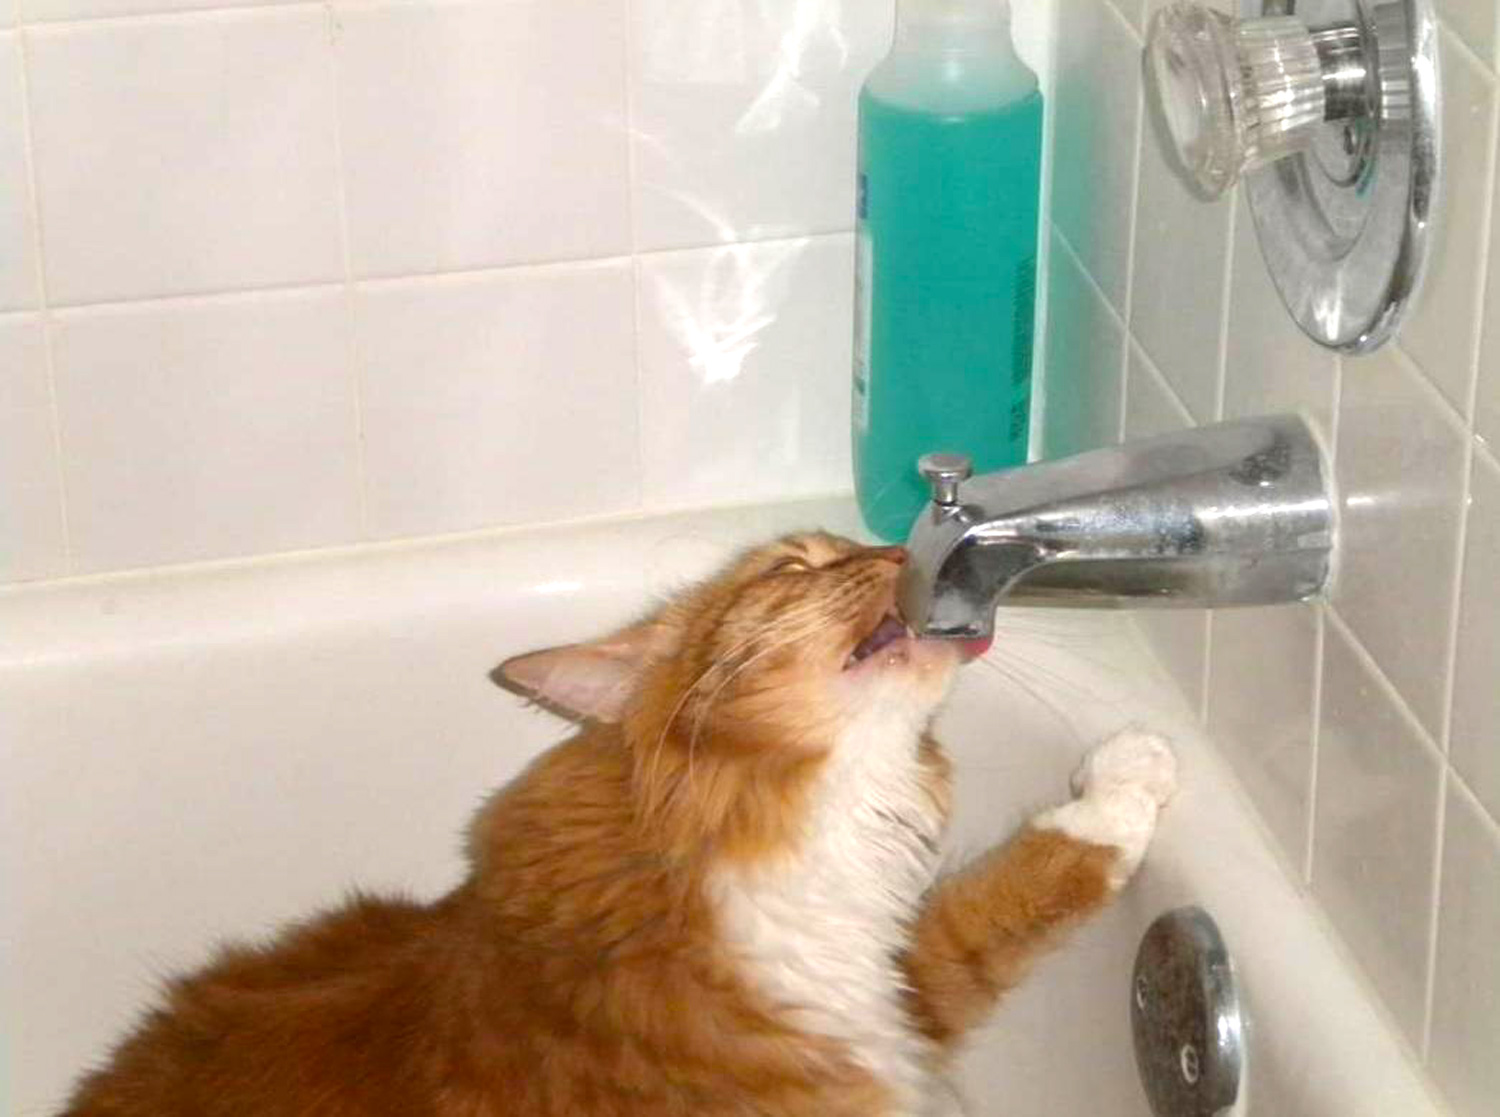 Meet Mr. Kitty. He’s one of our favorite Pet Pals – he’s getting a drink from the bathtub spigot!